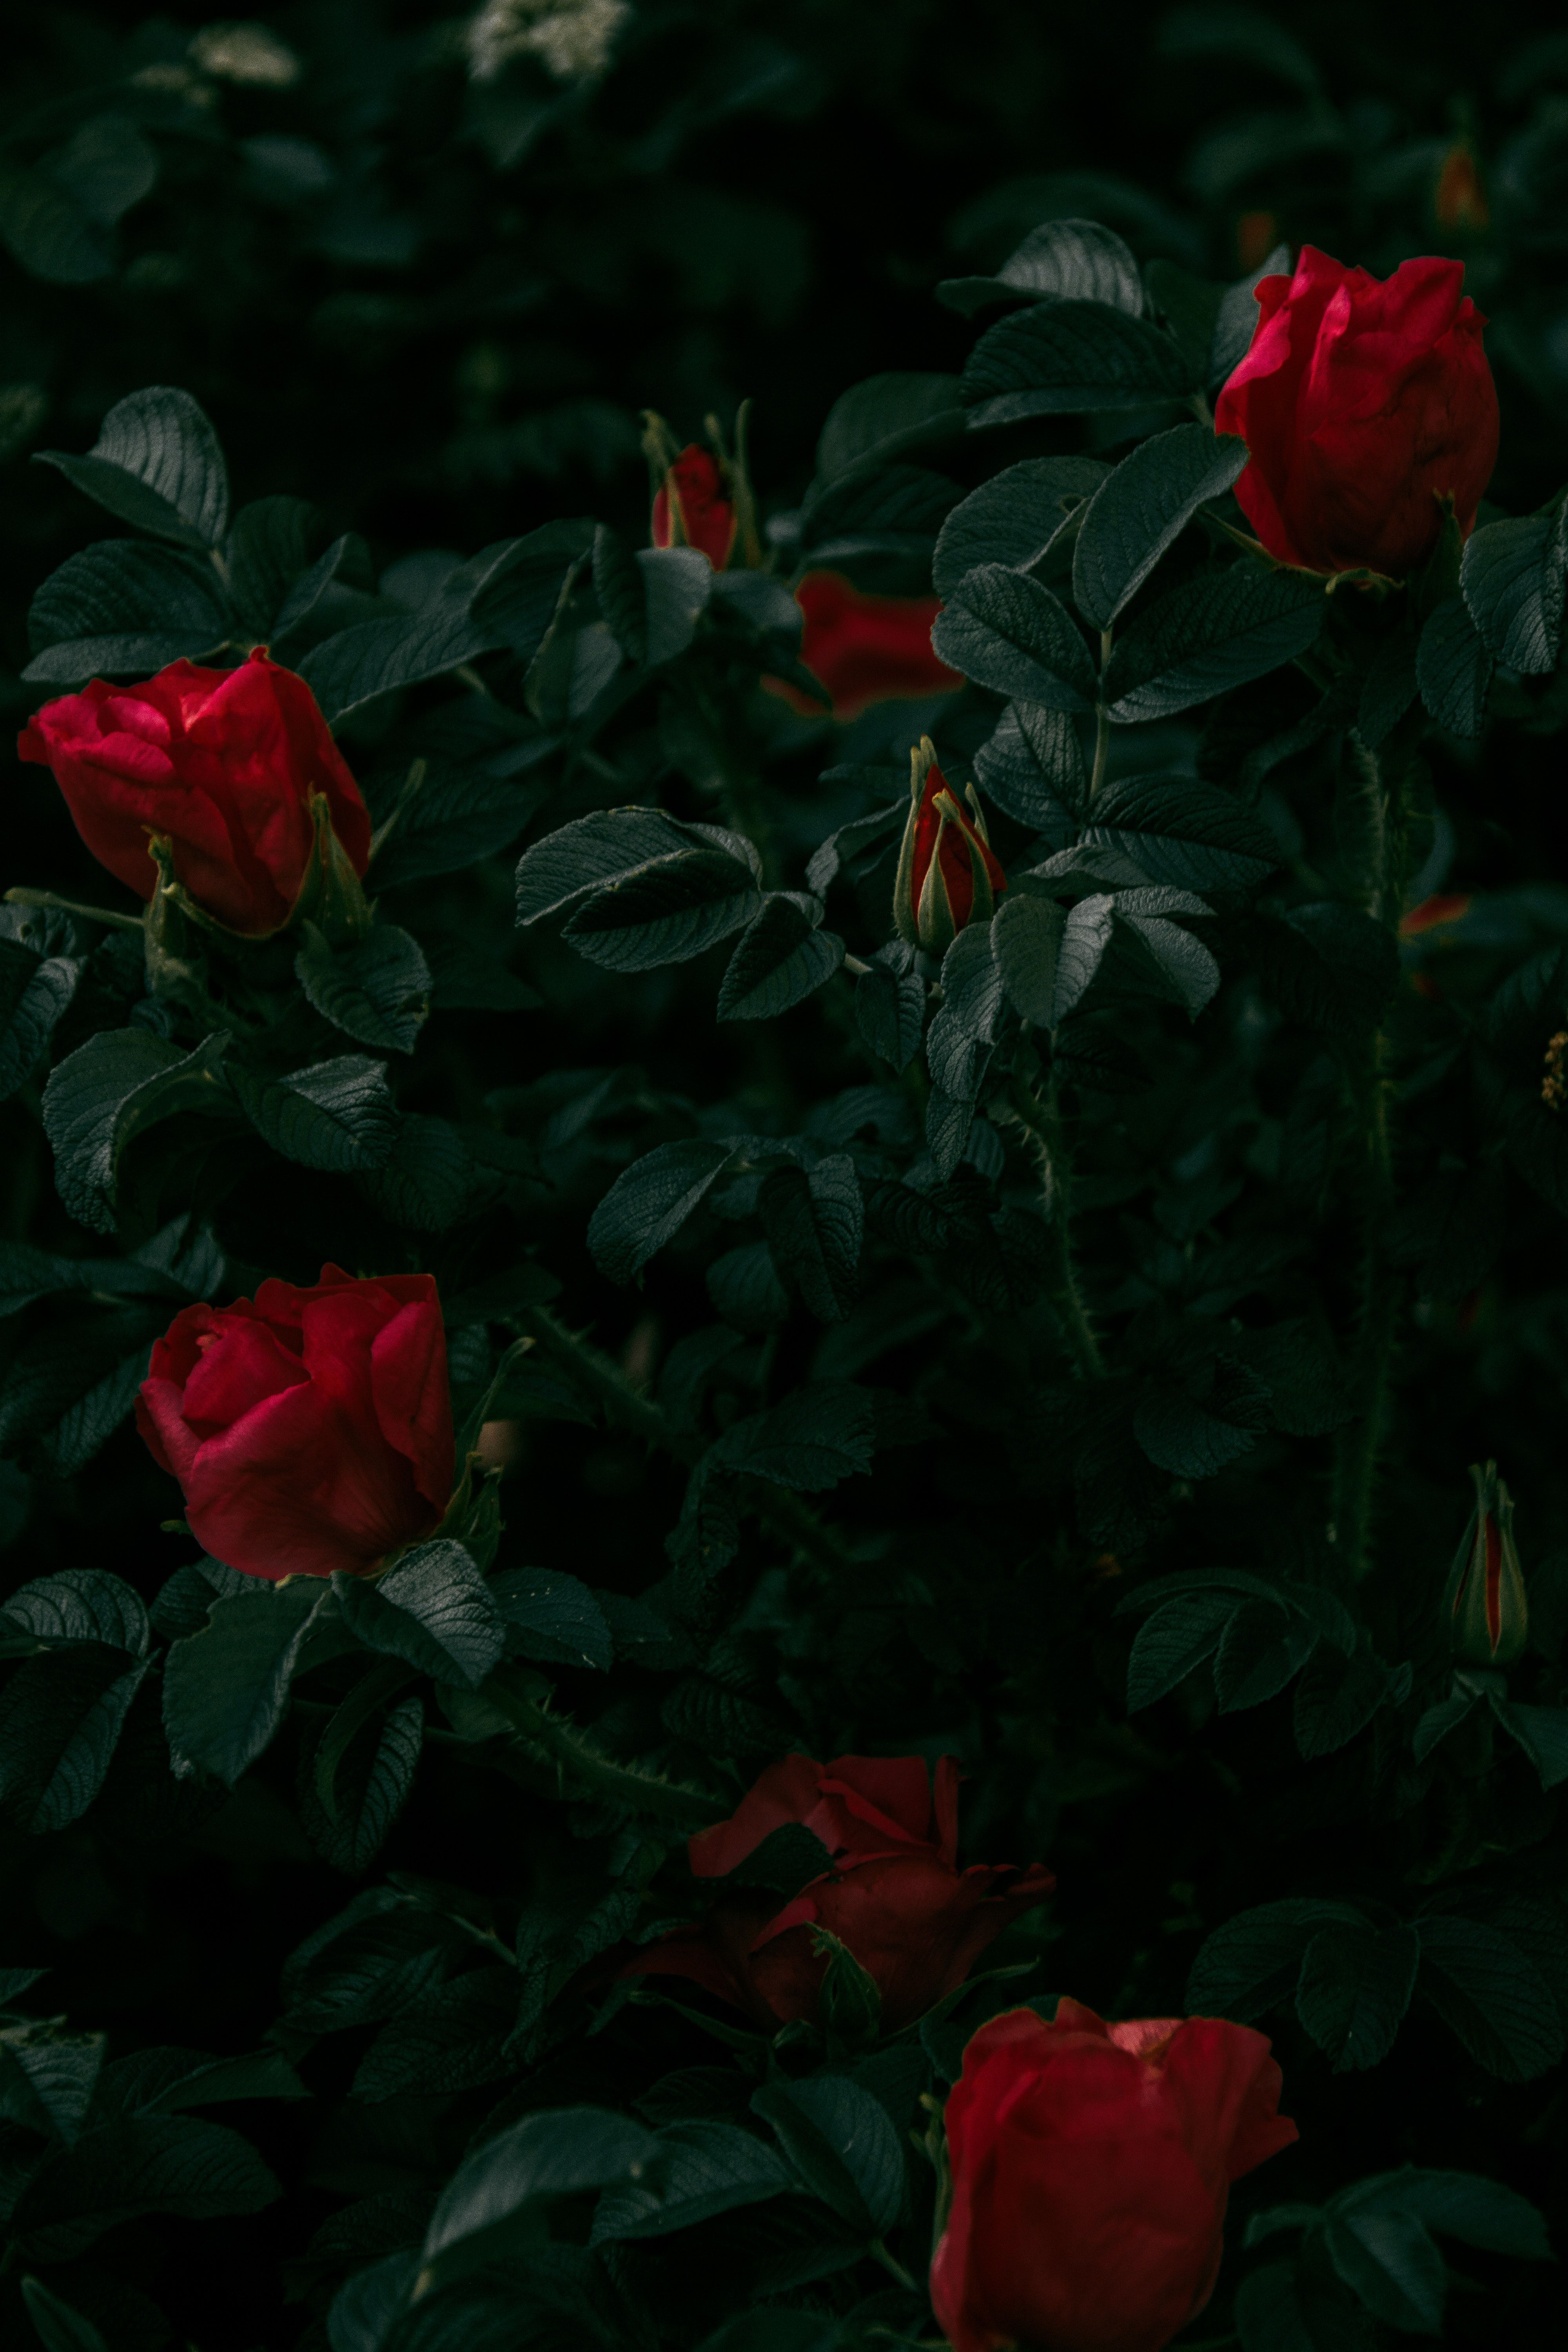 A close up of some red roses - Roses, garden, black rose